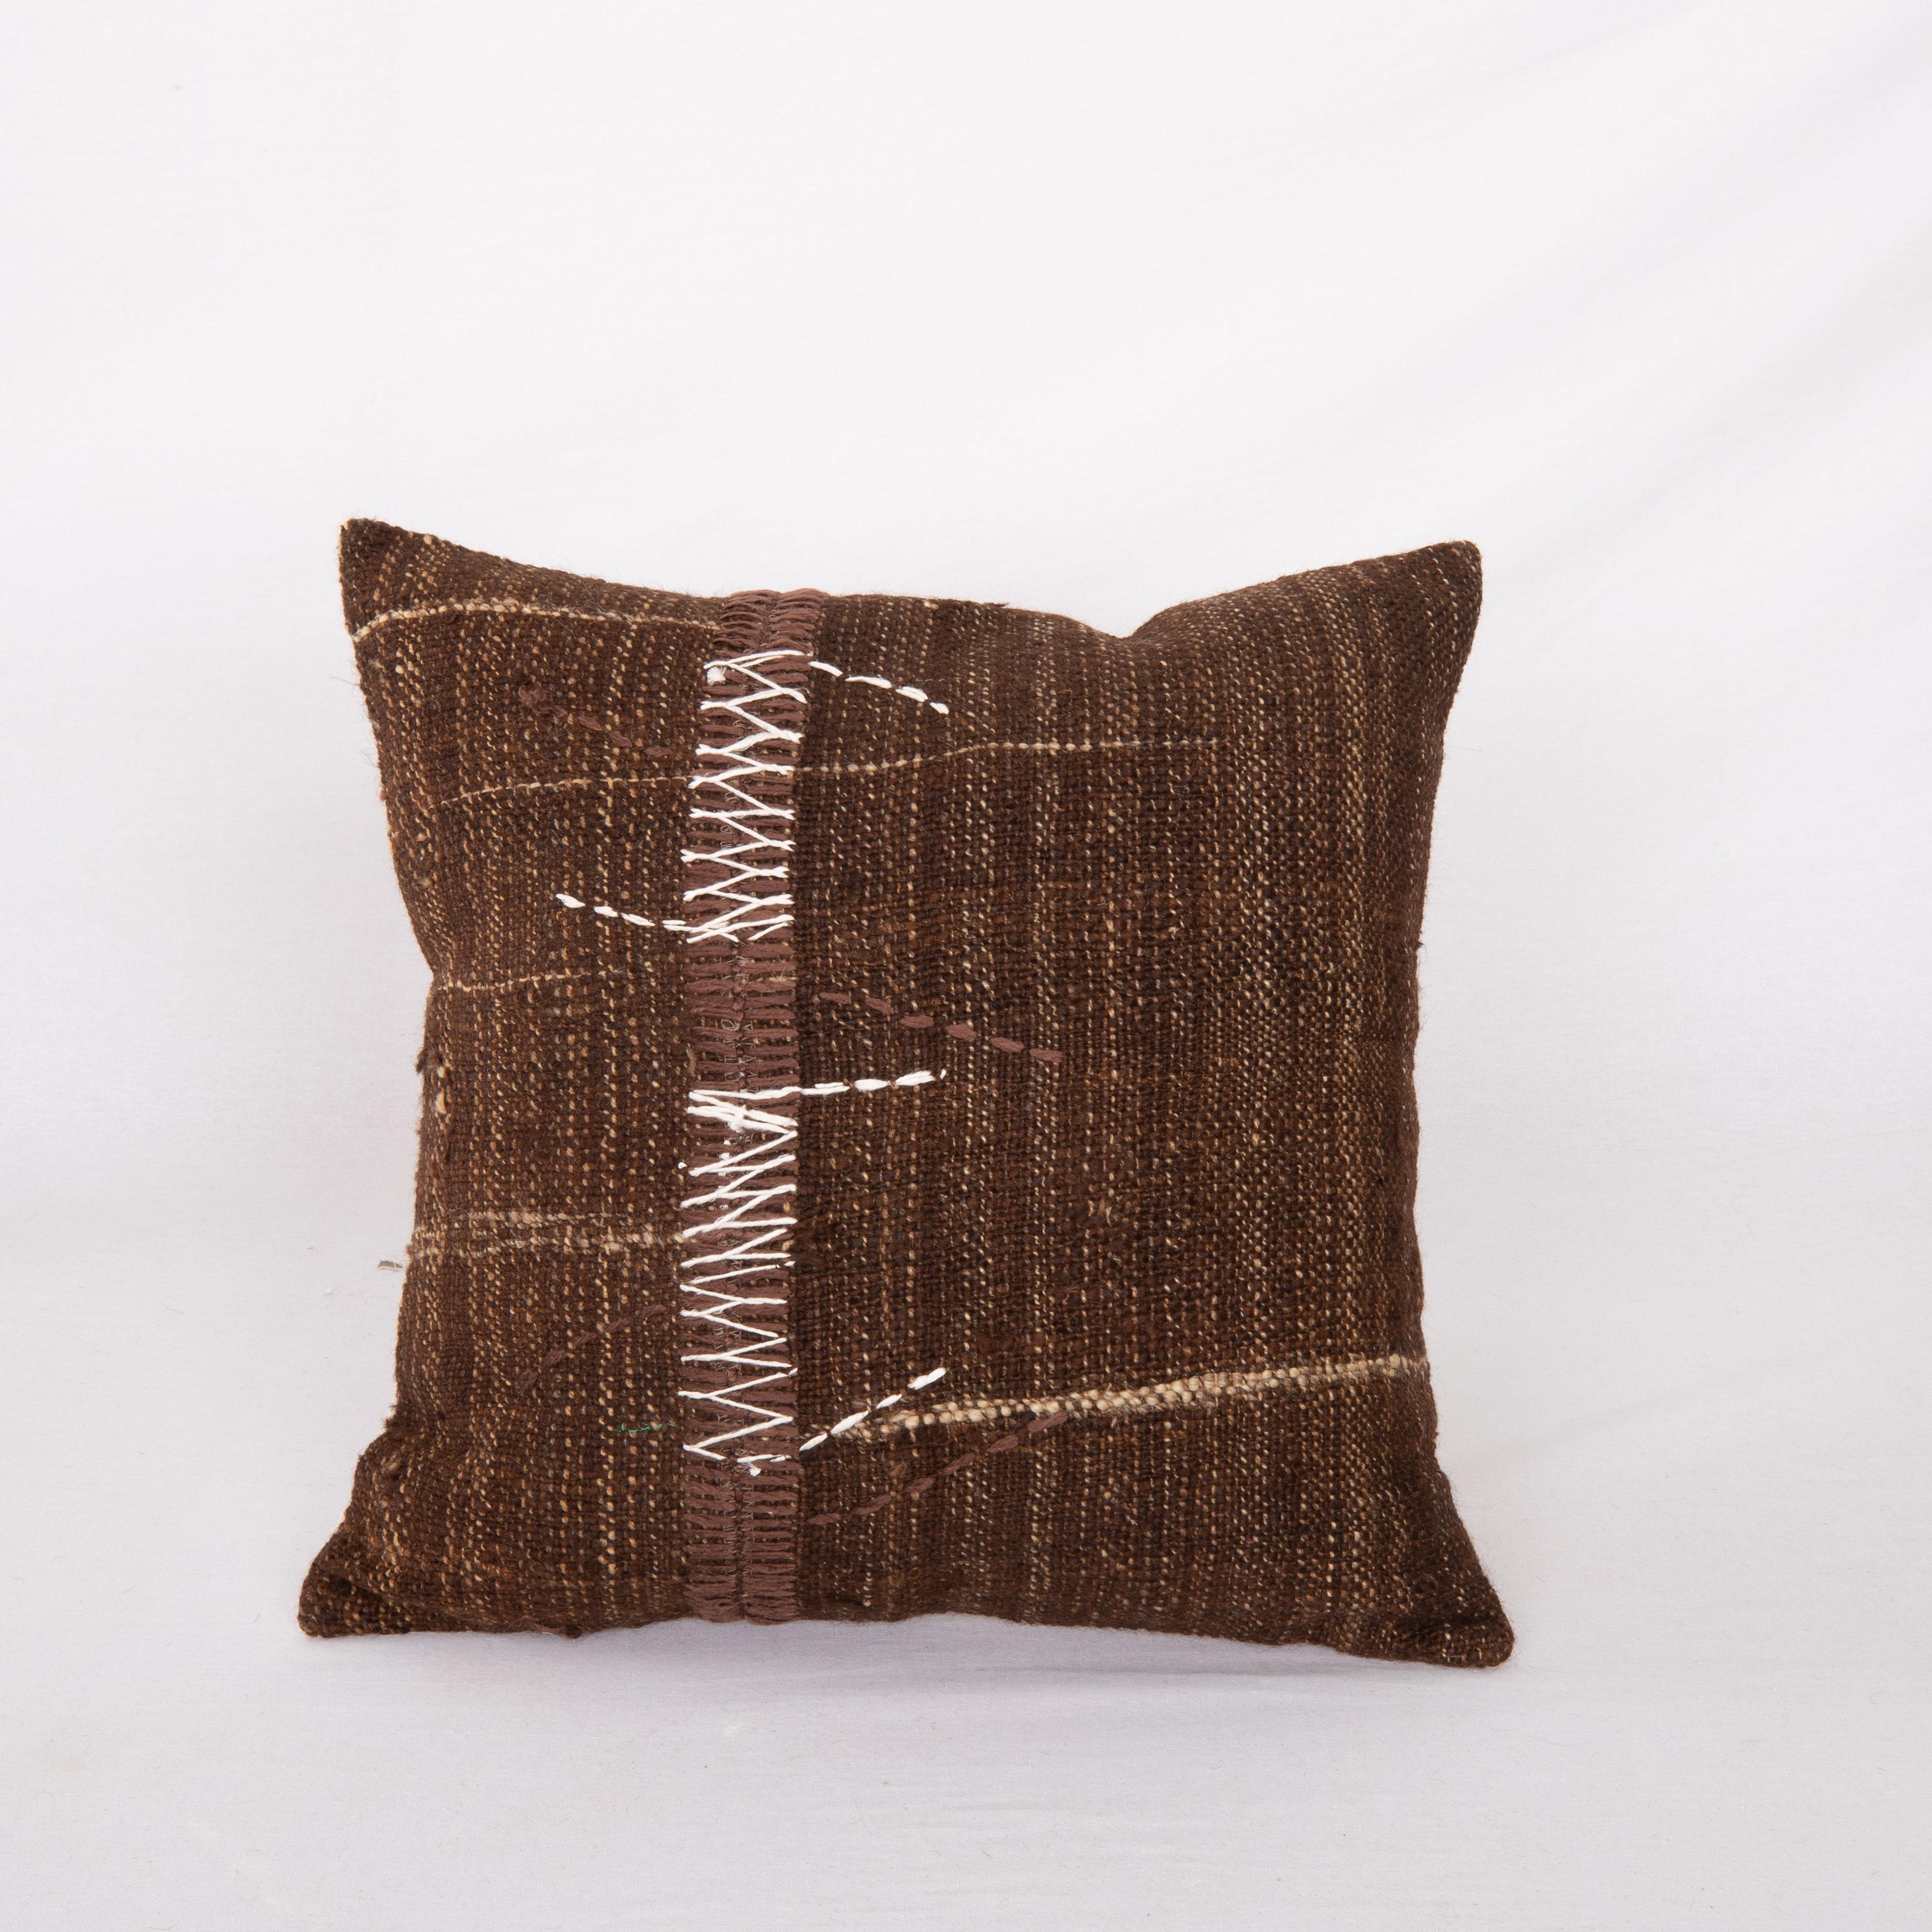 Rustic pillow case made from a vintage Un-Dyed wool coverlet, Mid 20th C


This pillow is made from a vintage coverlet that is hand woven using un-dyed wool. Our addition to the piece is silk hand stitching. It does not come with an insert. Linen in